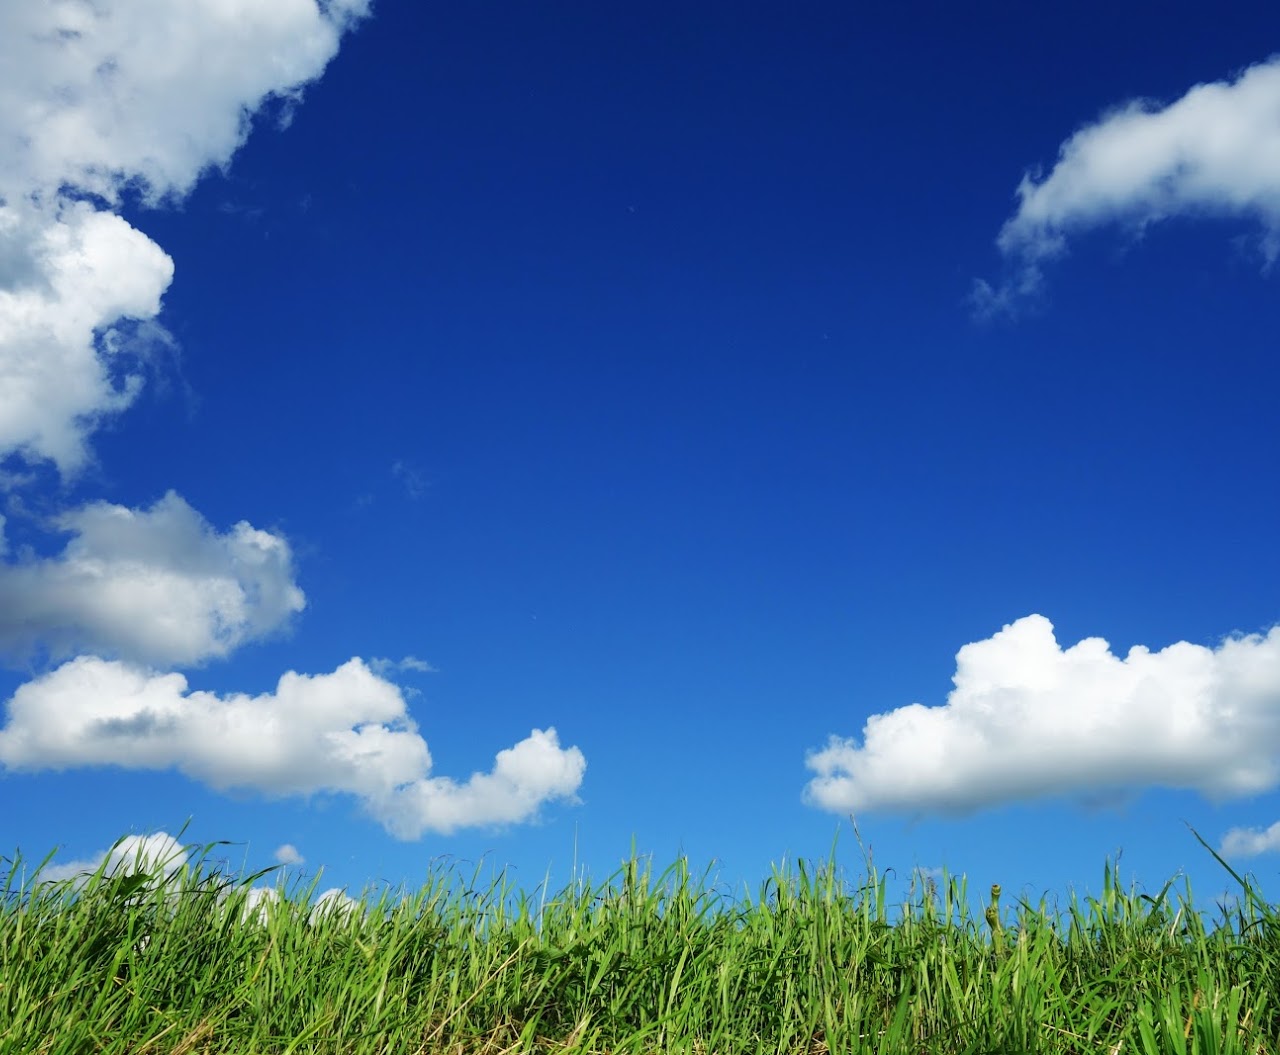 Image of a blue sky with clouds and grass in the foreground 